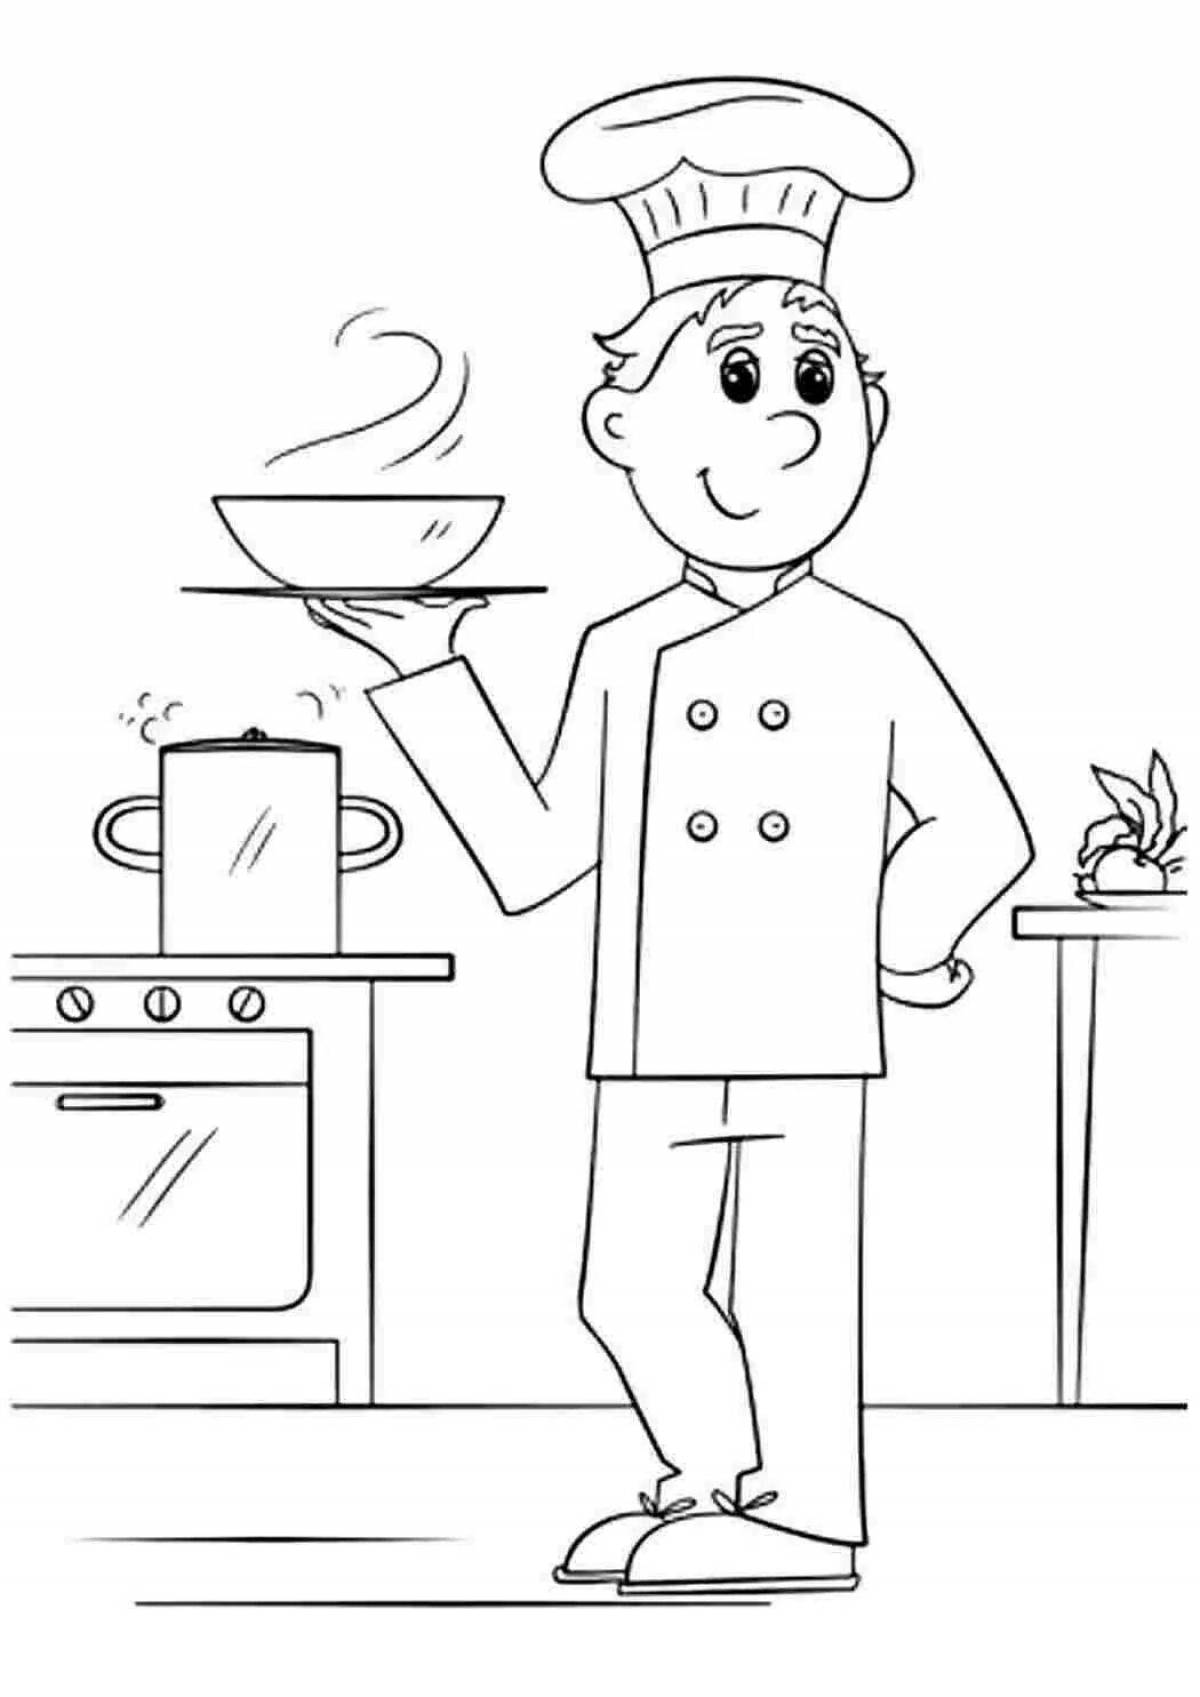 Coloring page funny chef